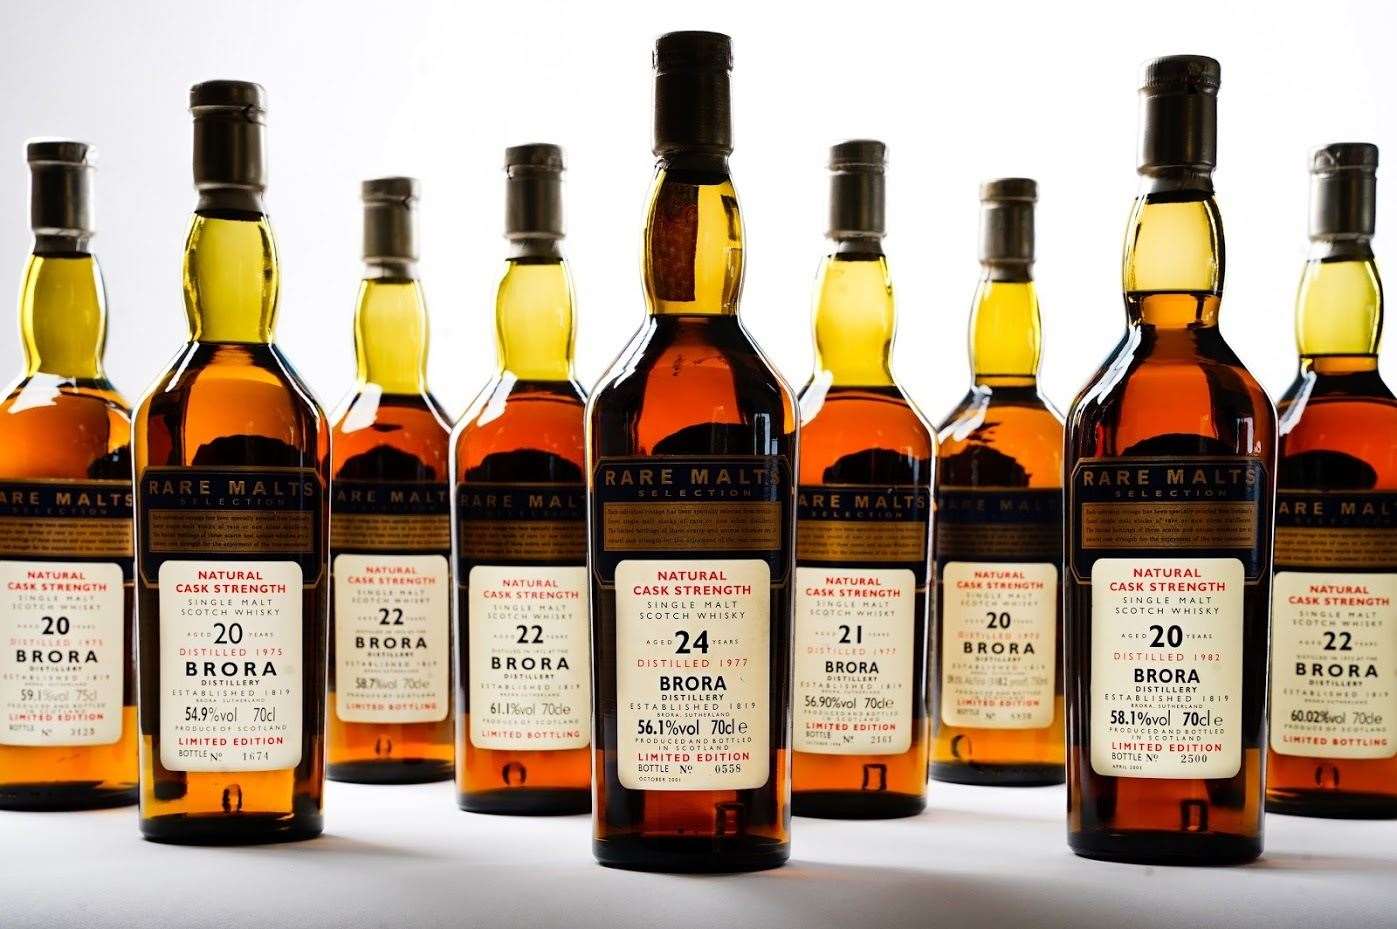 Some 50 bottles of Brora whisky are on offer - the largest number for sale at a single auction.